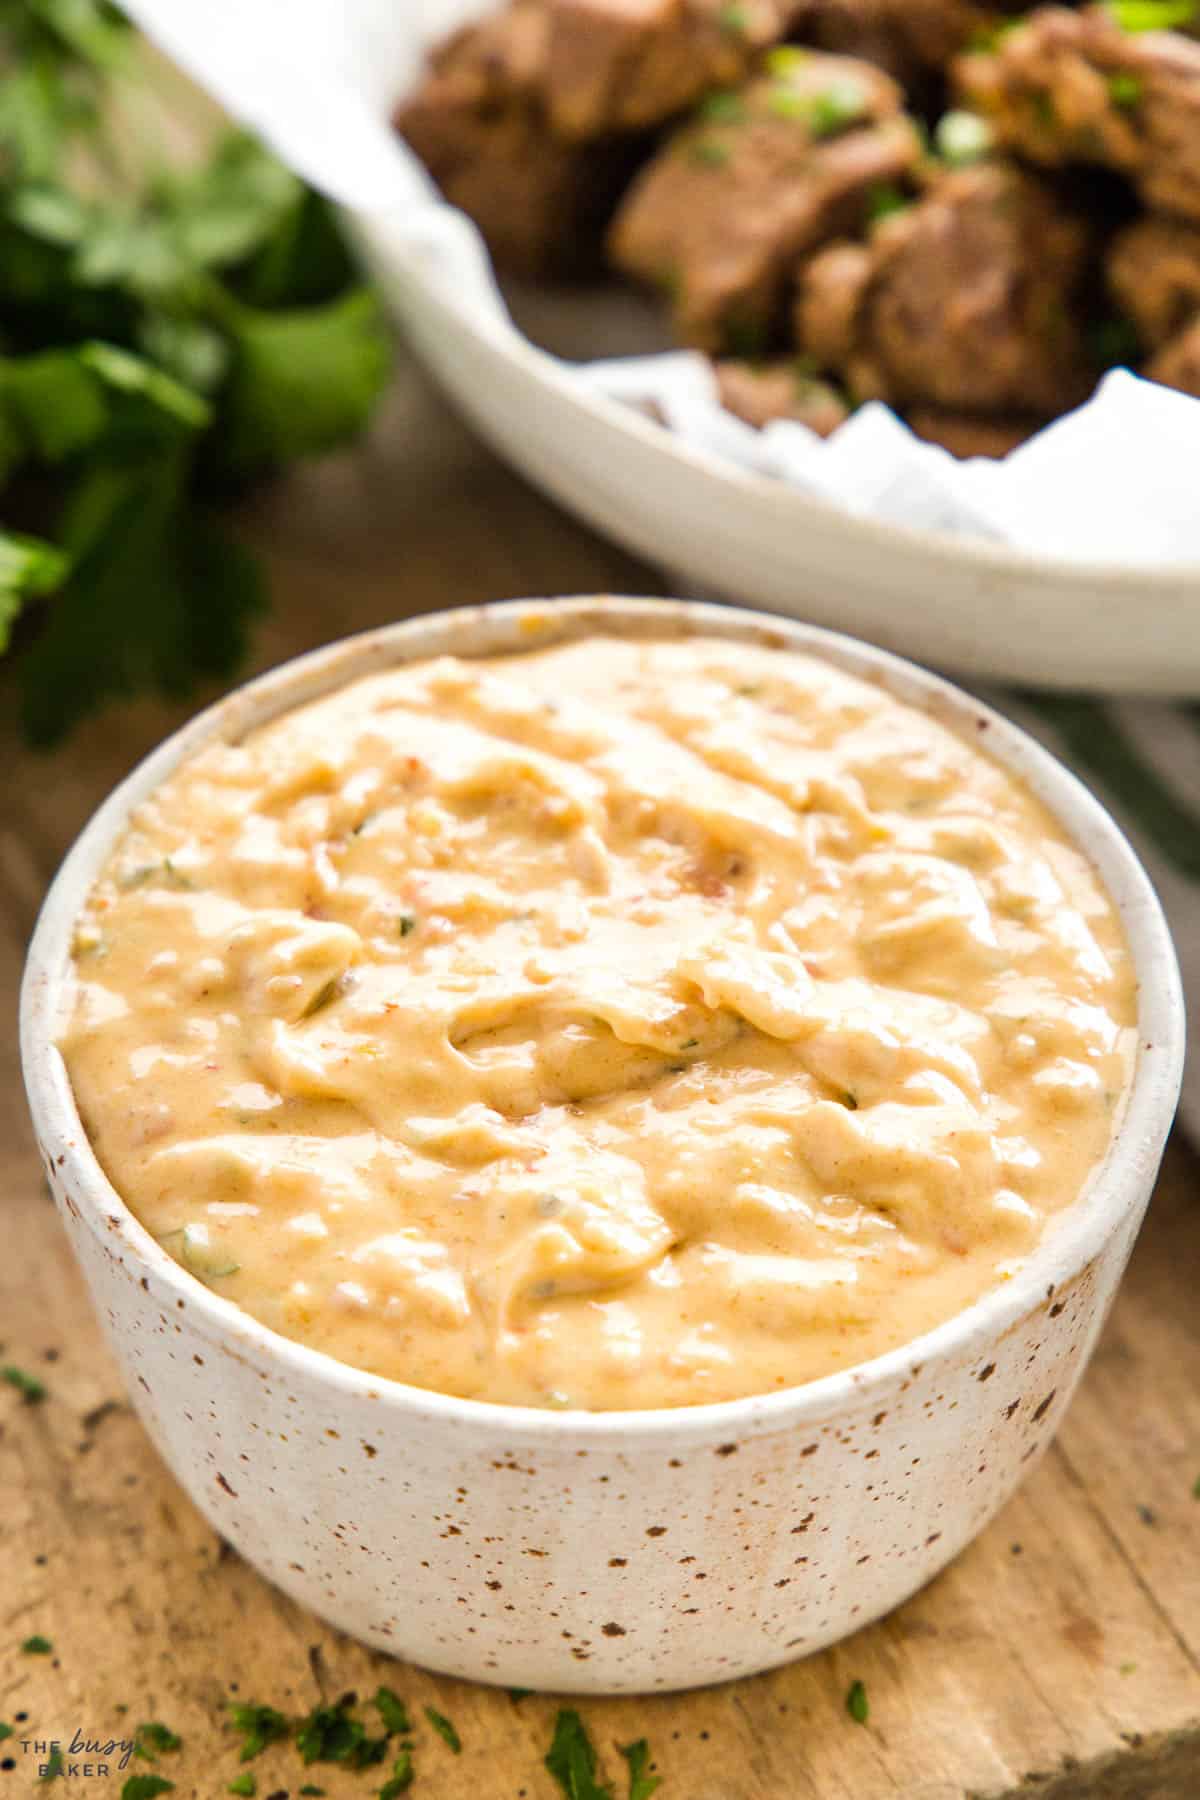 creamy sauce with herbs and spices to serve with steak